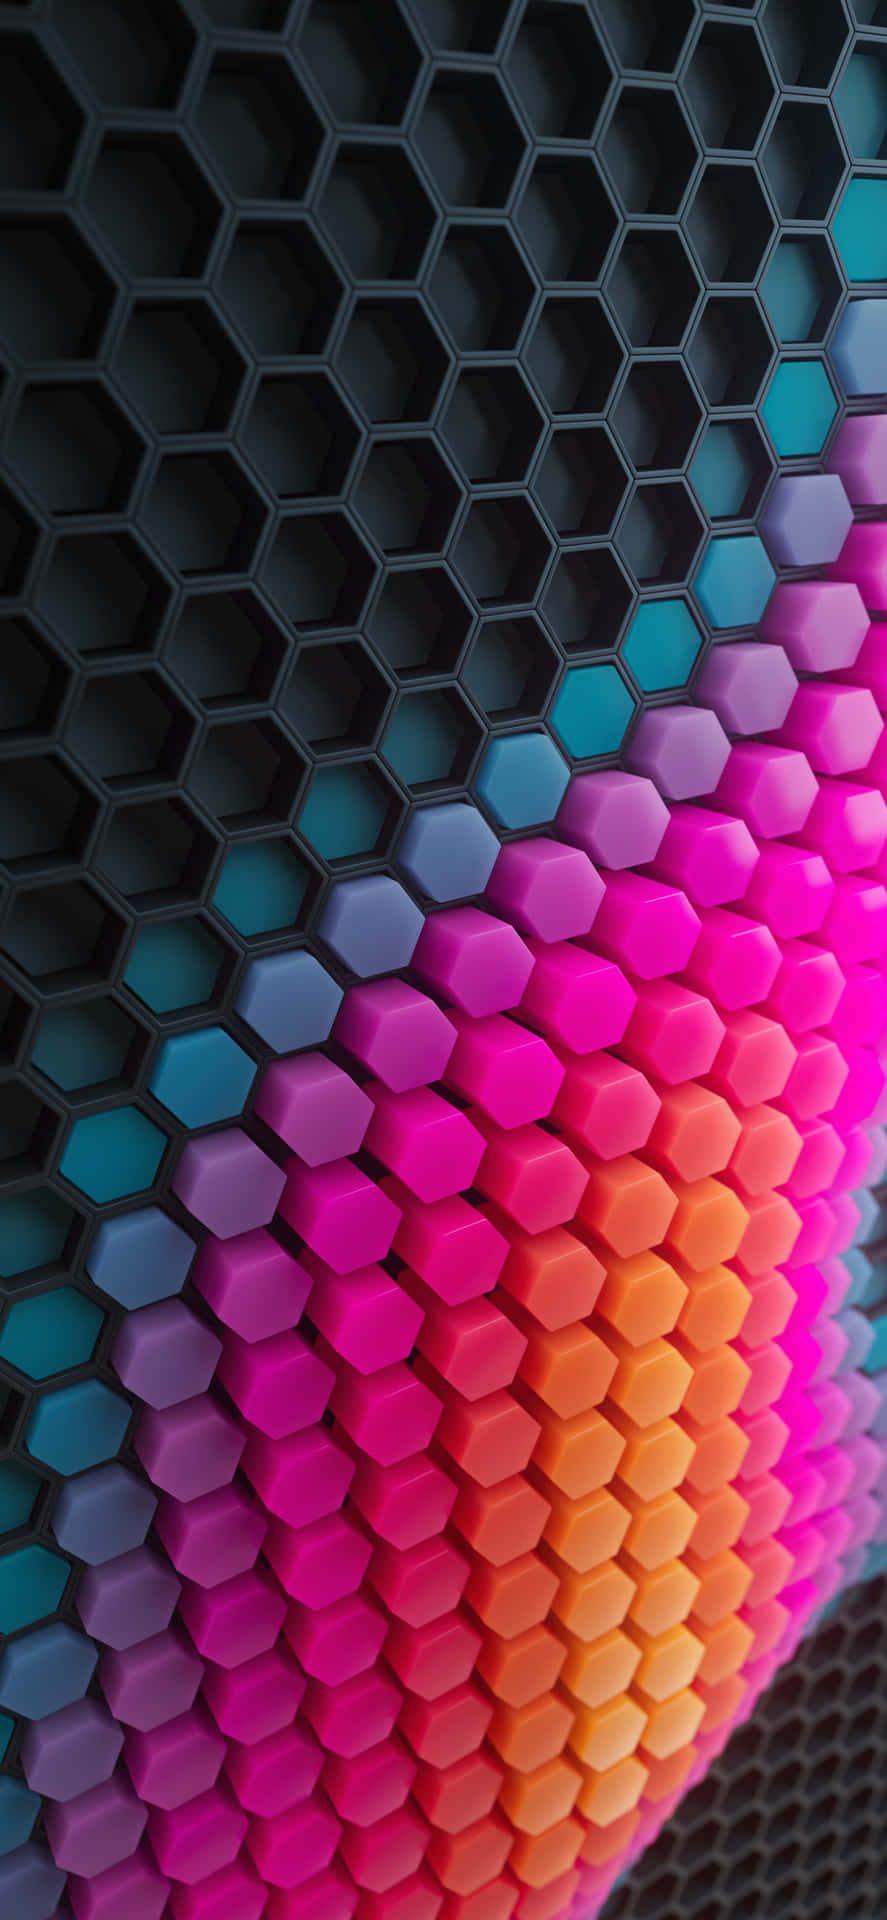 Colorful Geometric Pattern on Iphone Wallpaper